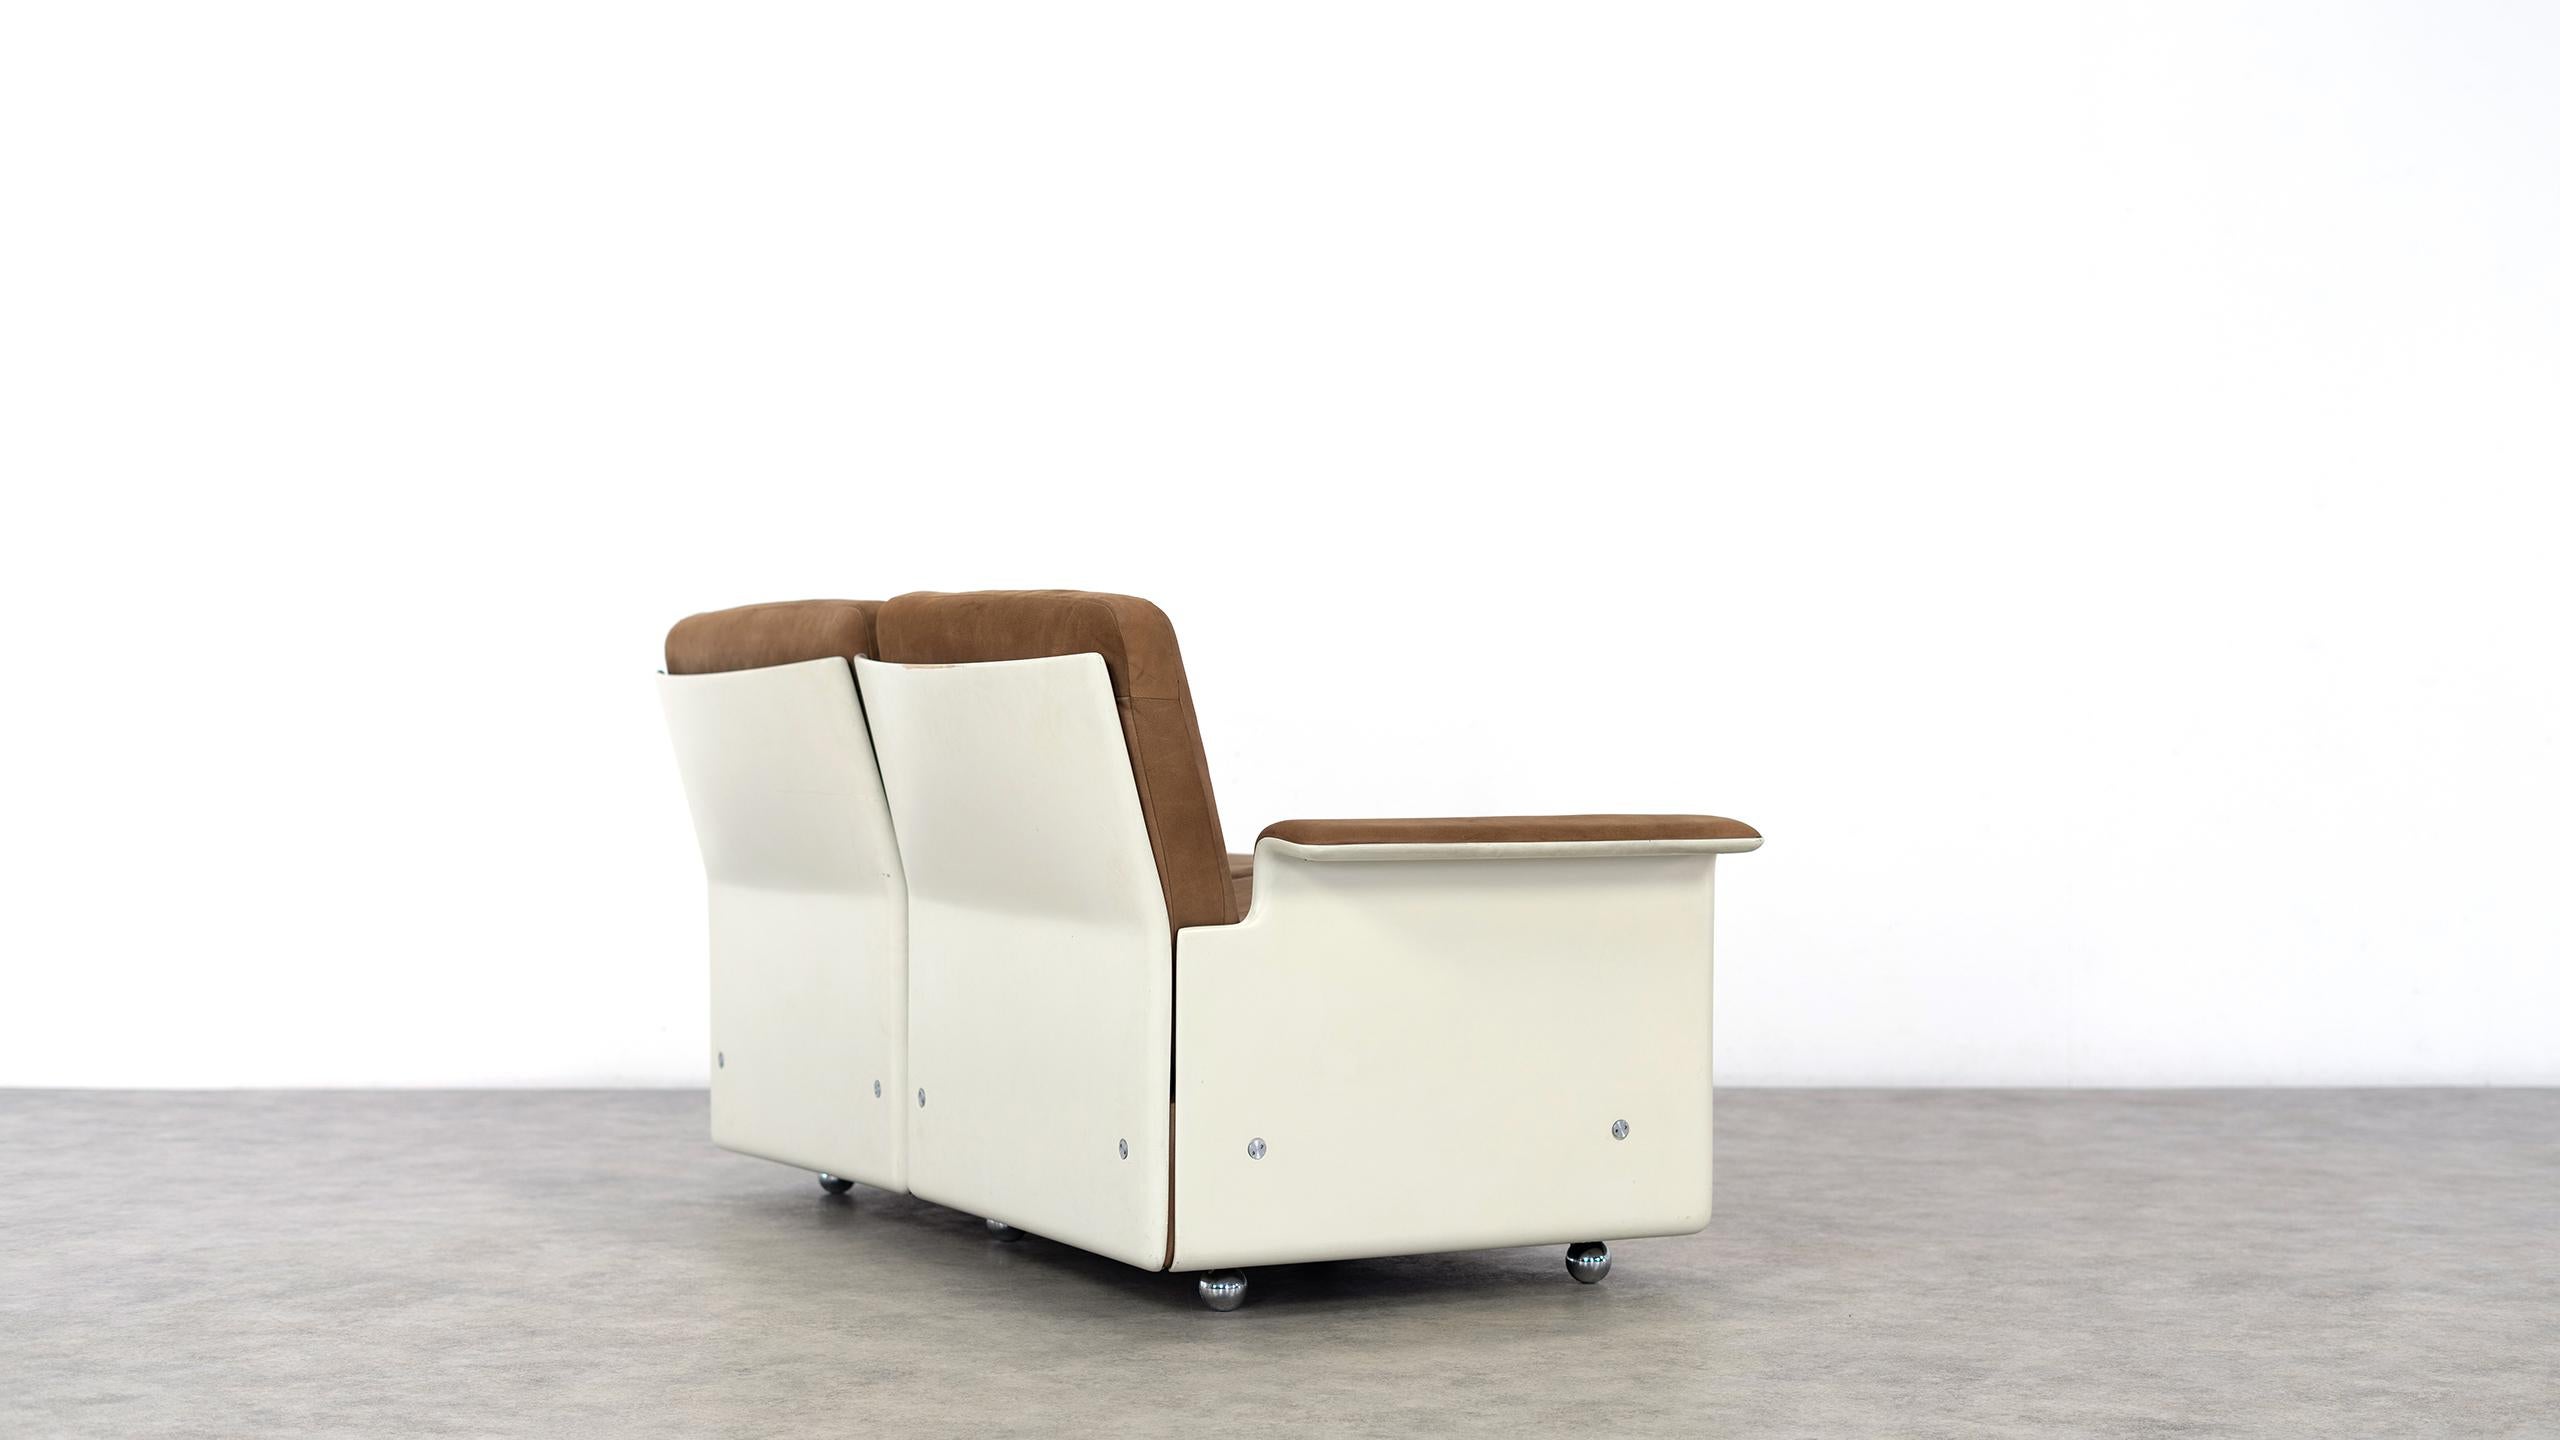 Mid-20th Century Dieter Rams, Sofa RZ 62, 1962 by Vitsœ SDR+ 2-Seat in Nubuk, Germany